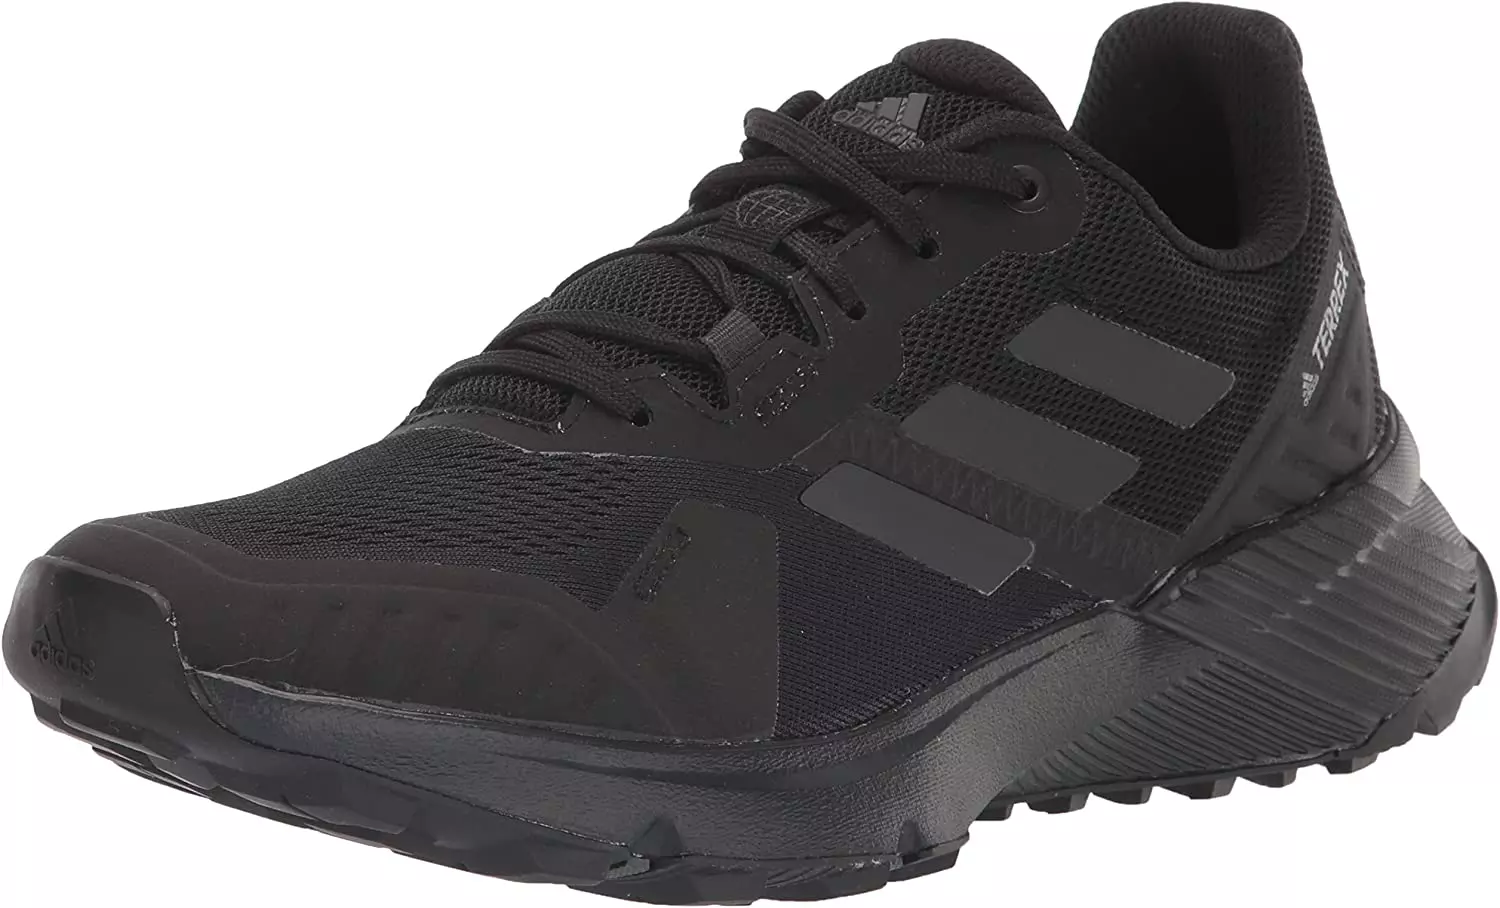 The Adidas Men's Terrex Soulstride Trail Running Shoes is a solid trail shoe that comes in a solid color and goes well with many different clothing styles for the golf course